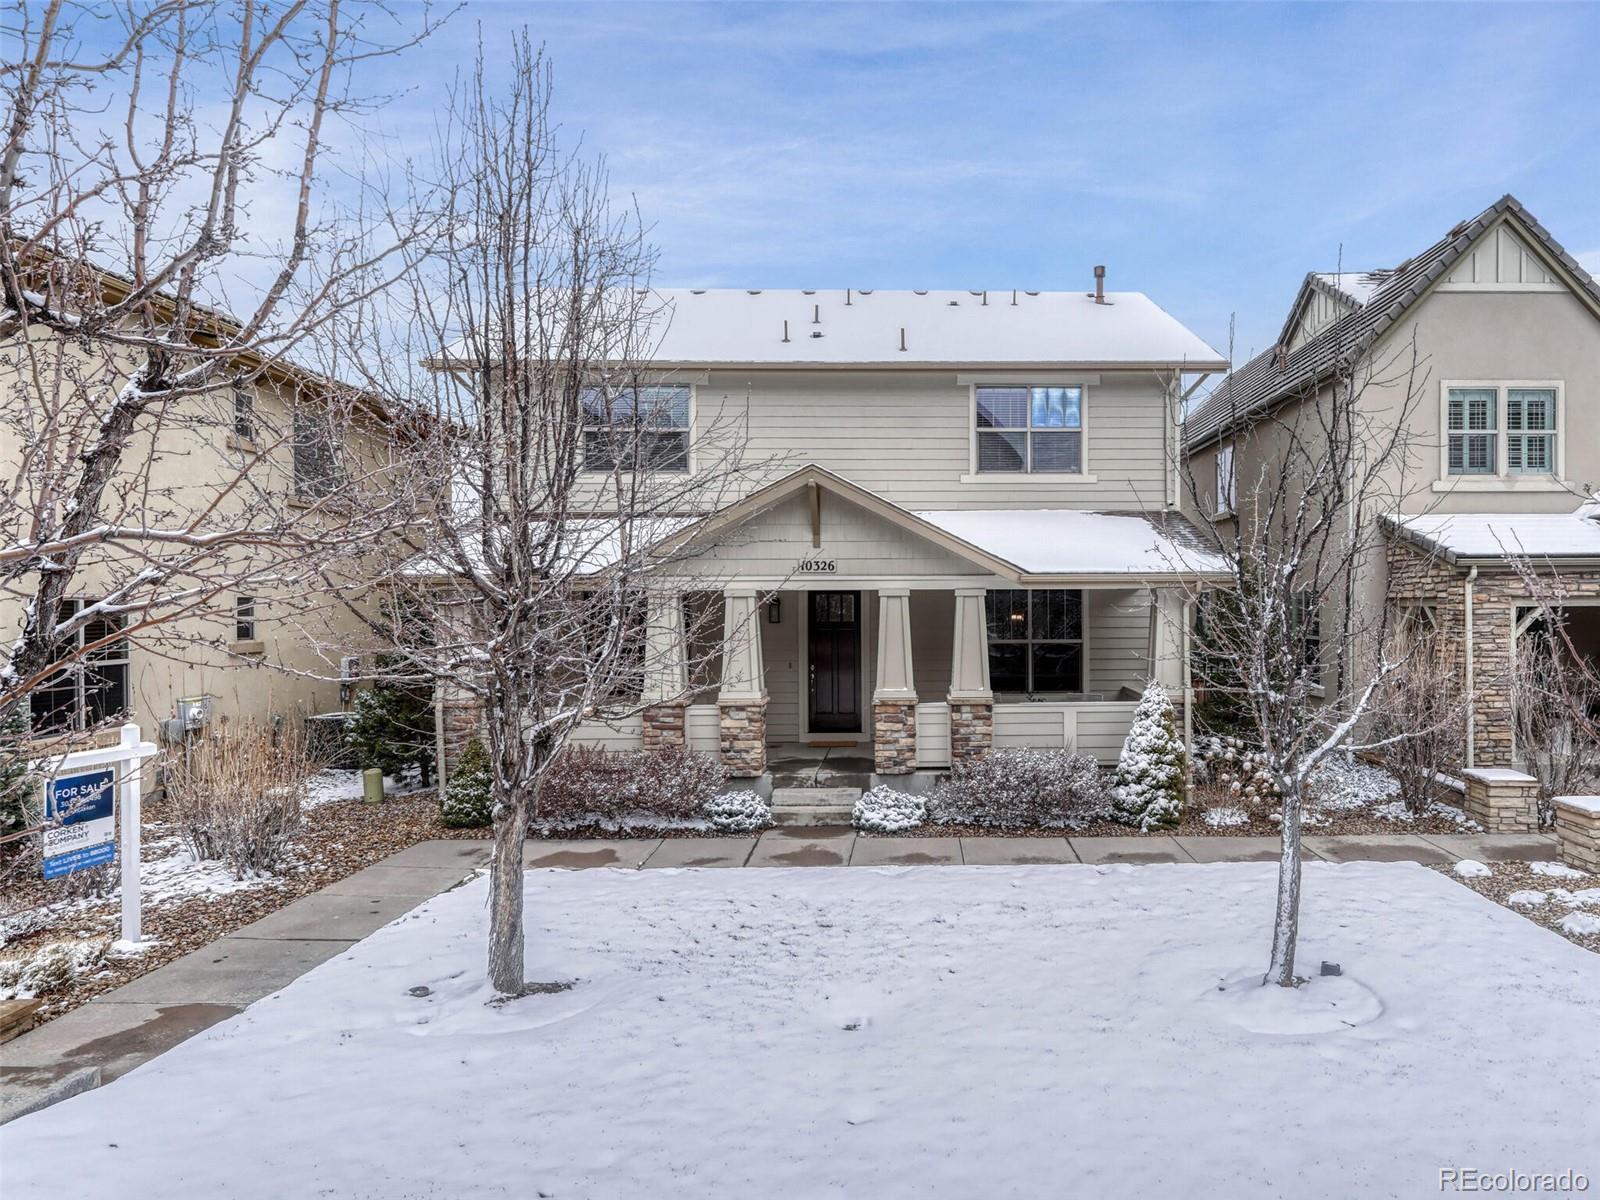 10326 Bluffmont, Lone Tree, CO